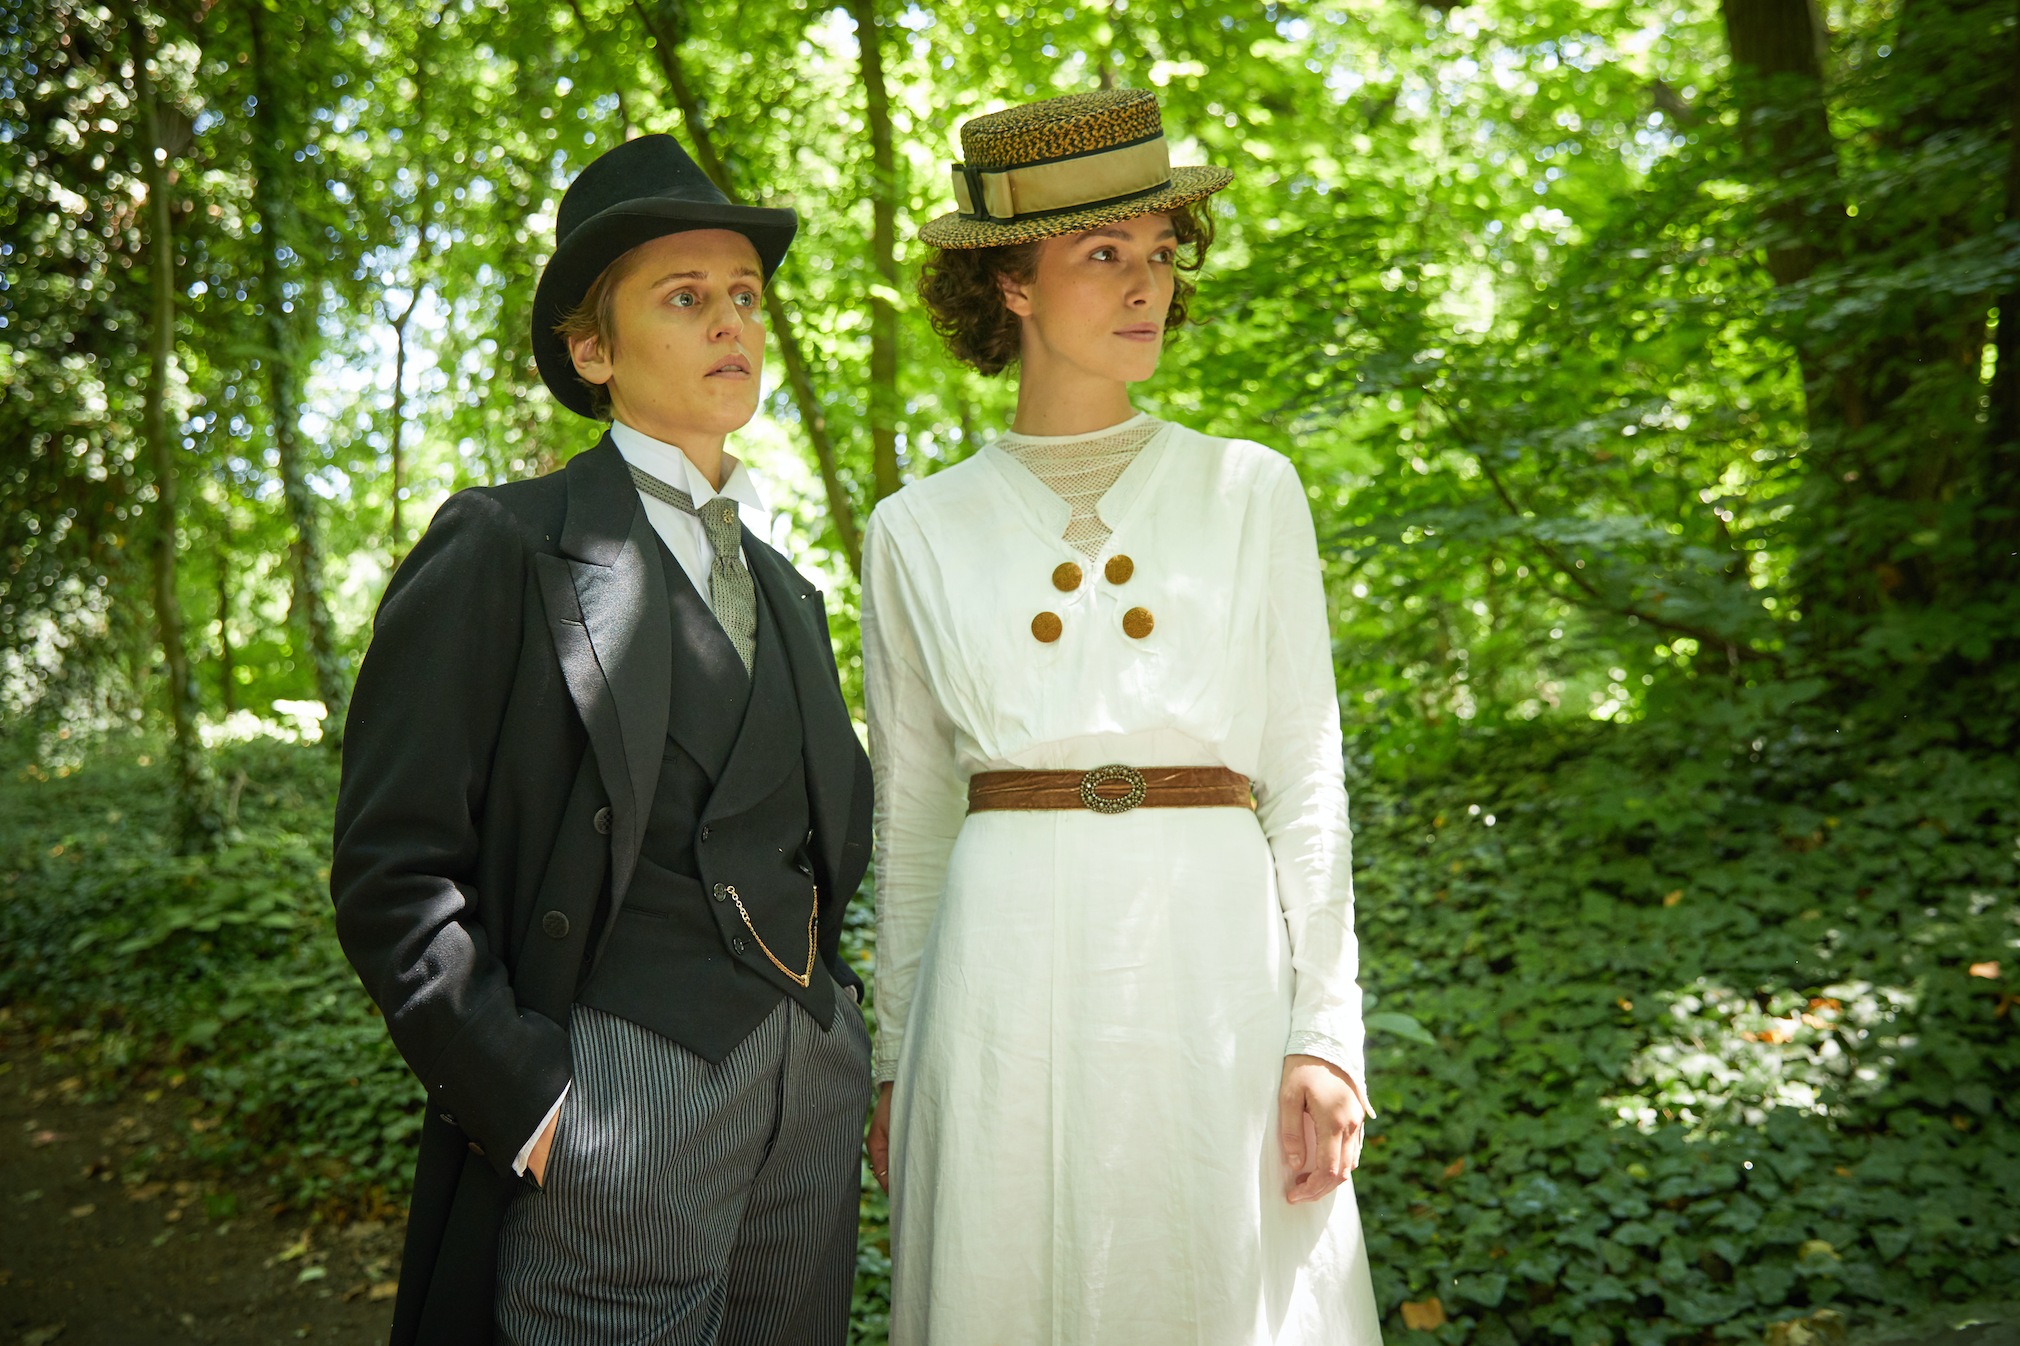 Denise Gough (left) plays Mathilde de Morny, also known as Missy, in Colette.